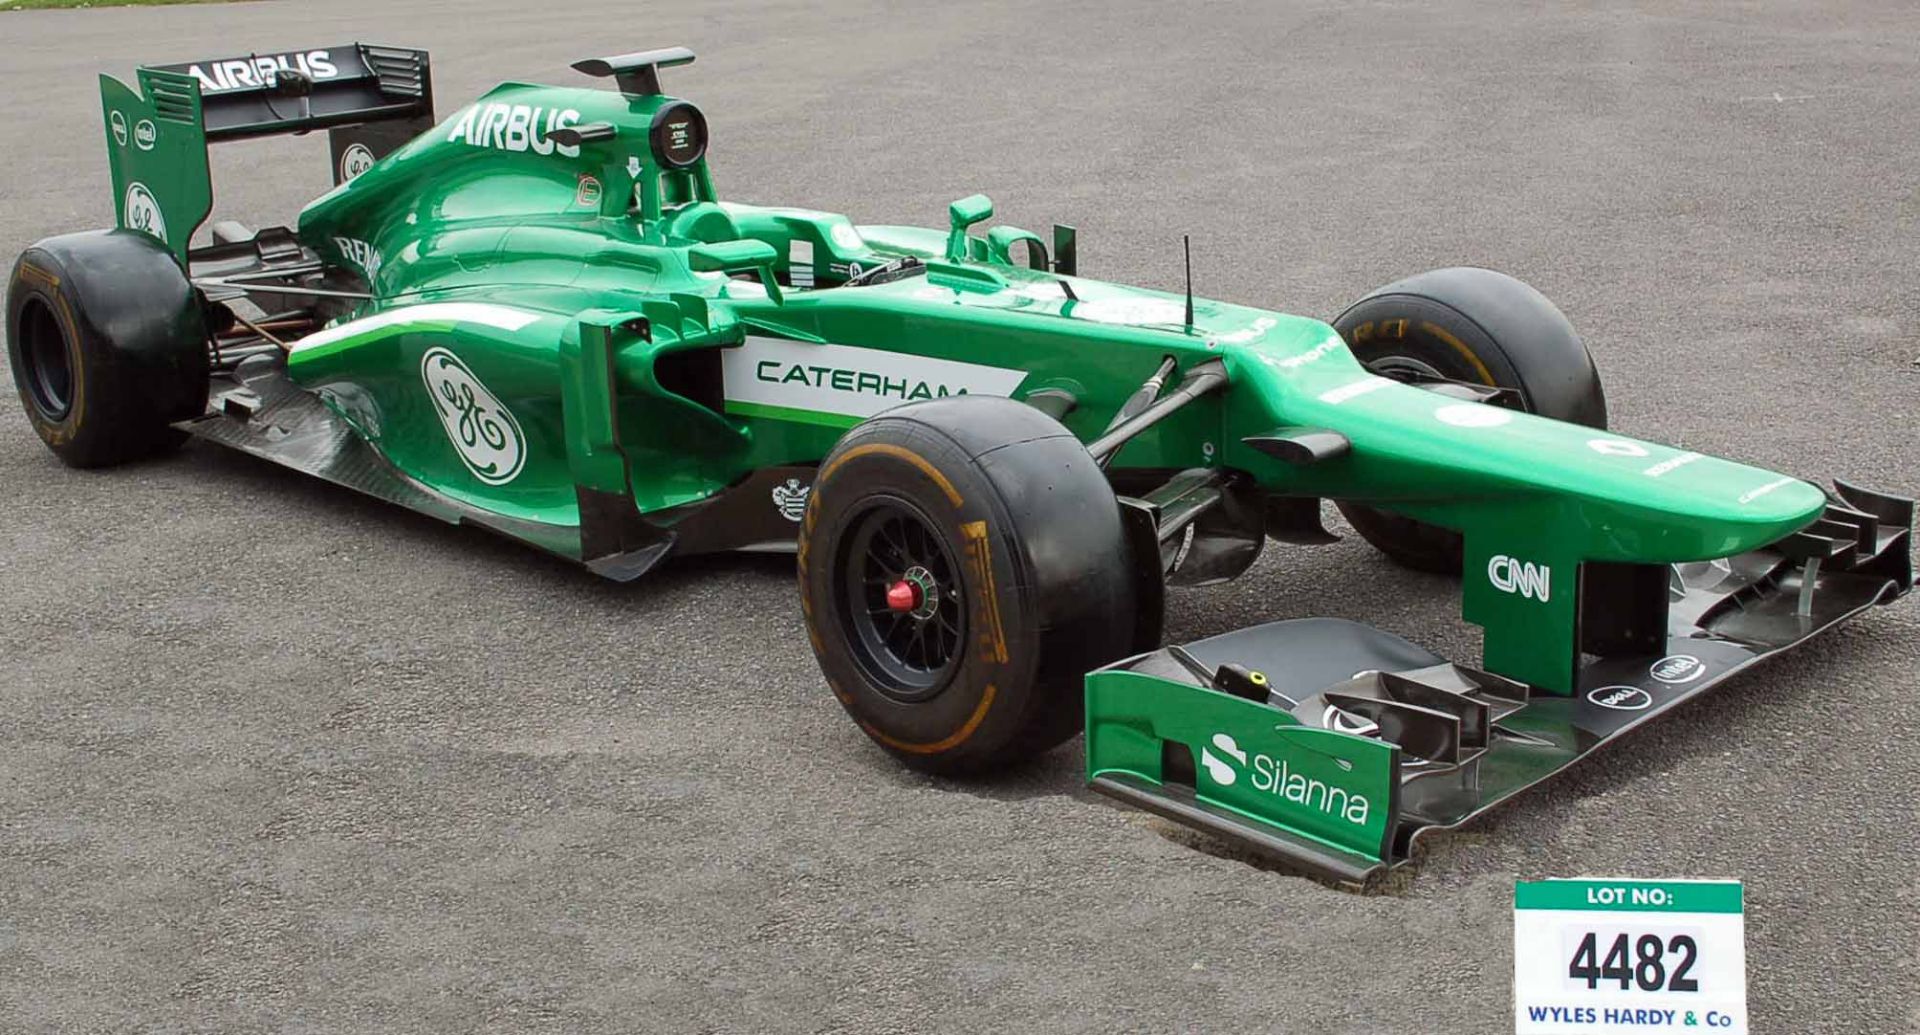 A CATERHAM F1 2013 Formula 1 Full Rolling Chassis Show Car, Chassis No. CT03-6